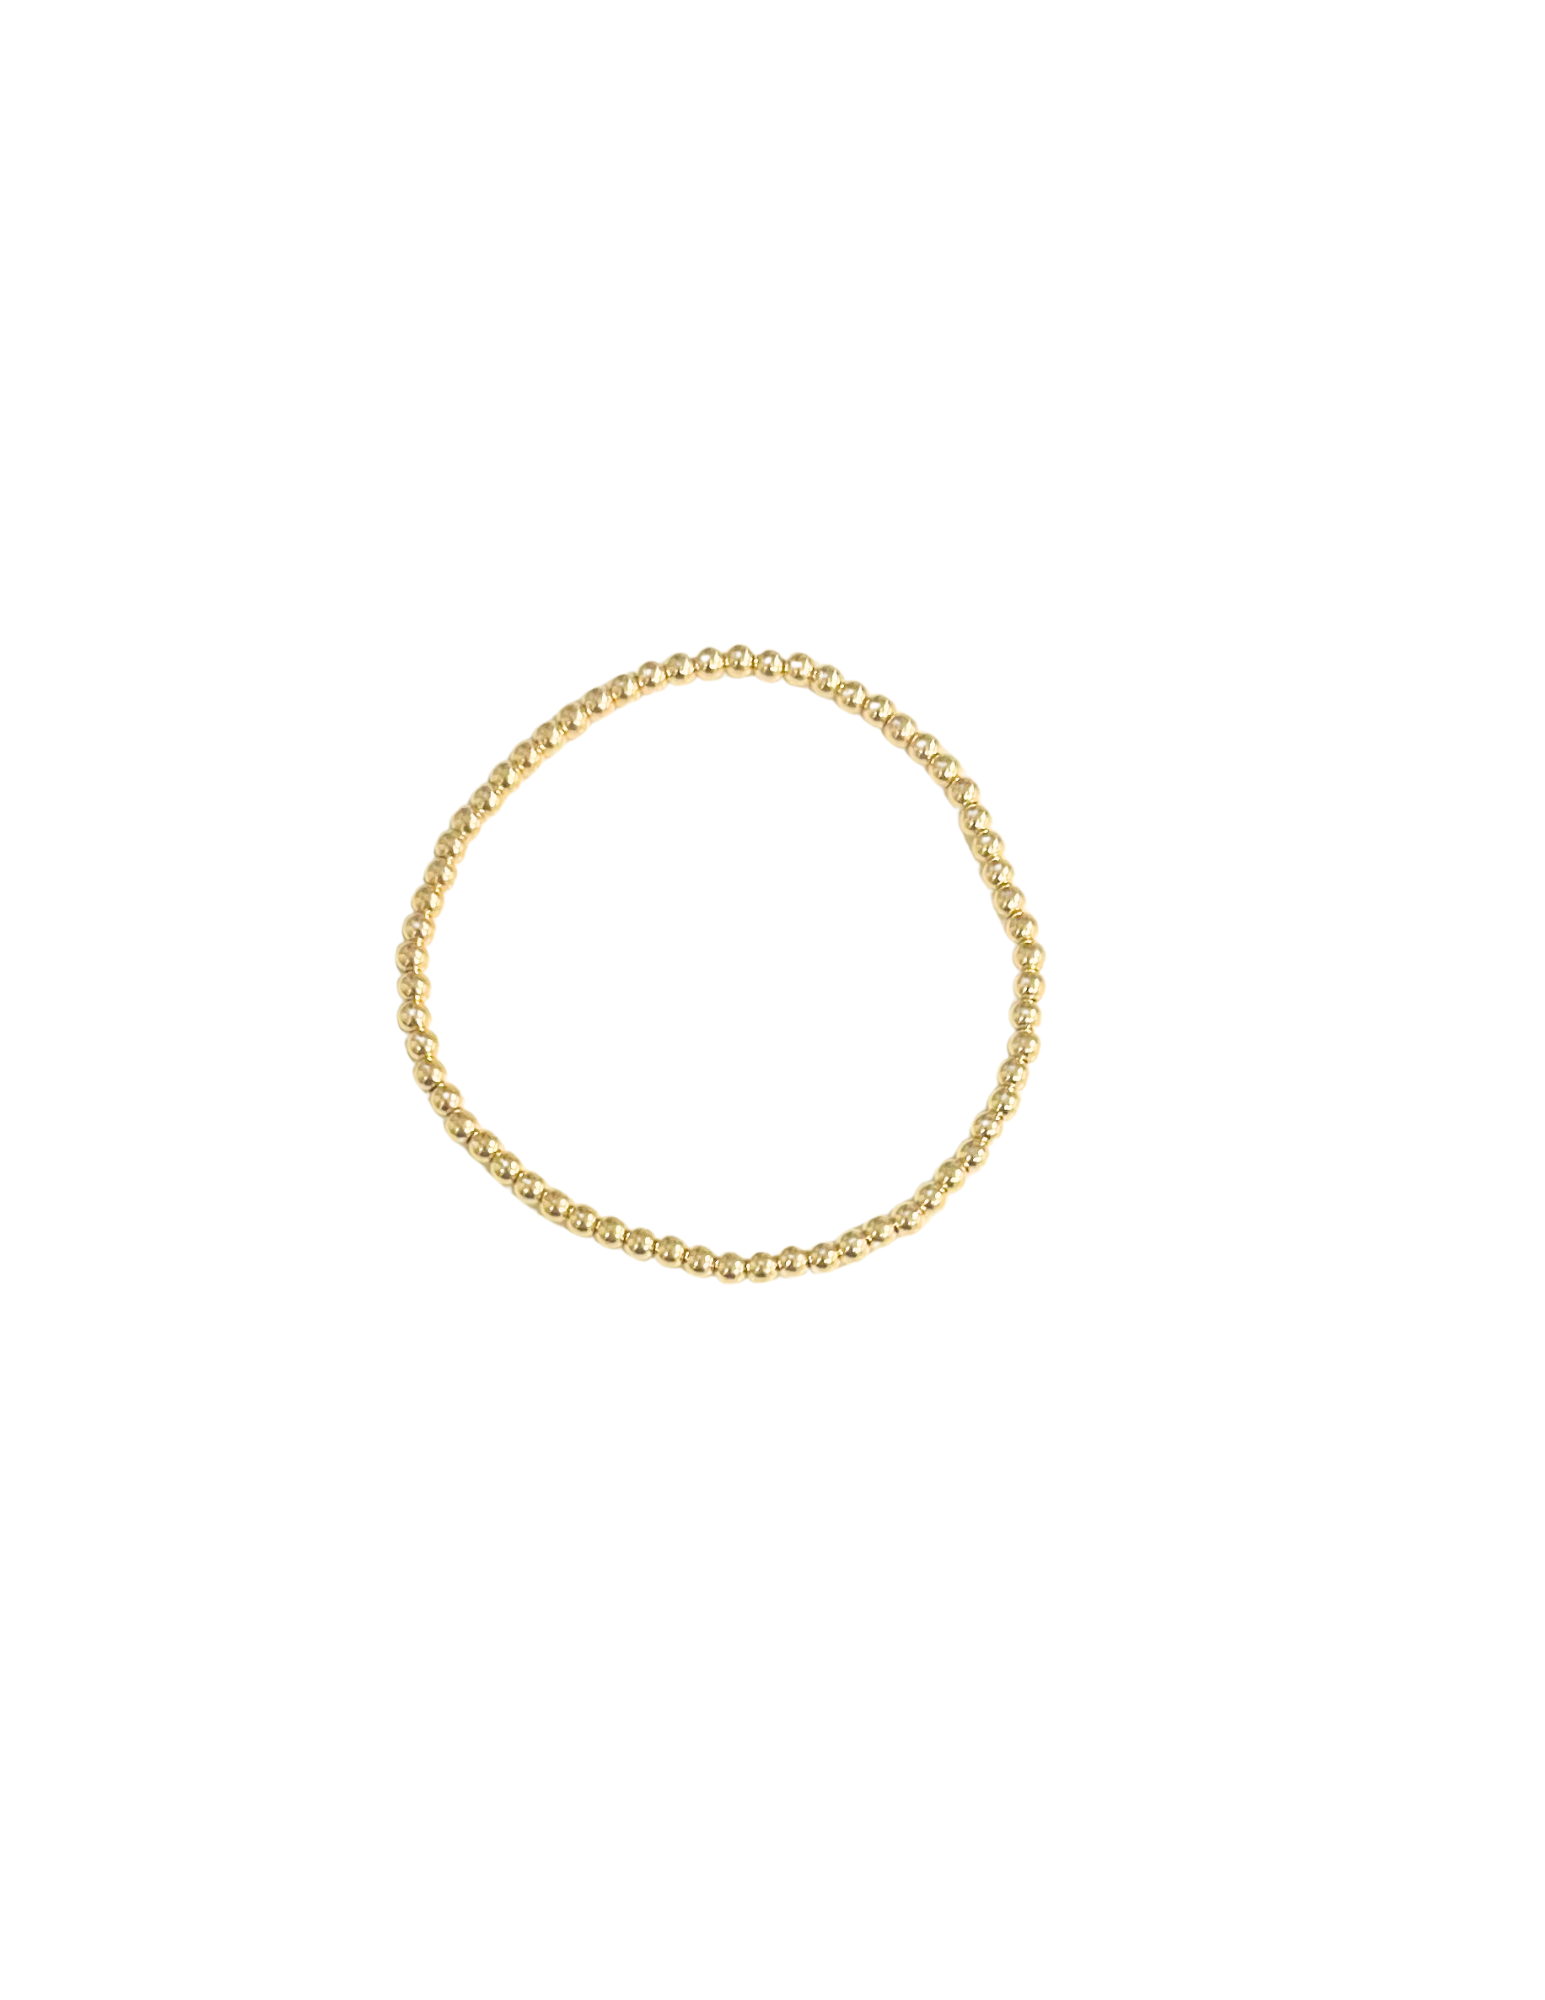 The Eternity Bracelet in Gold Smooth